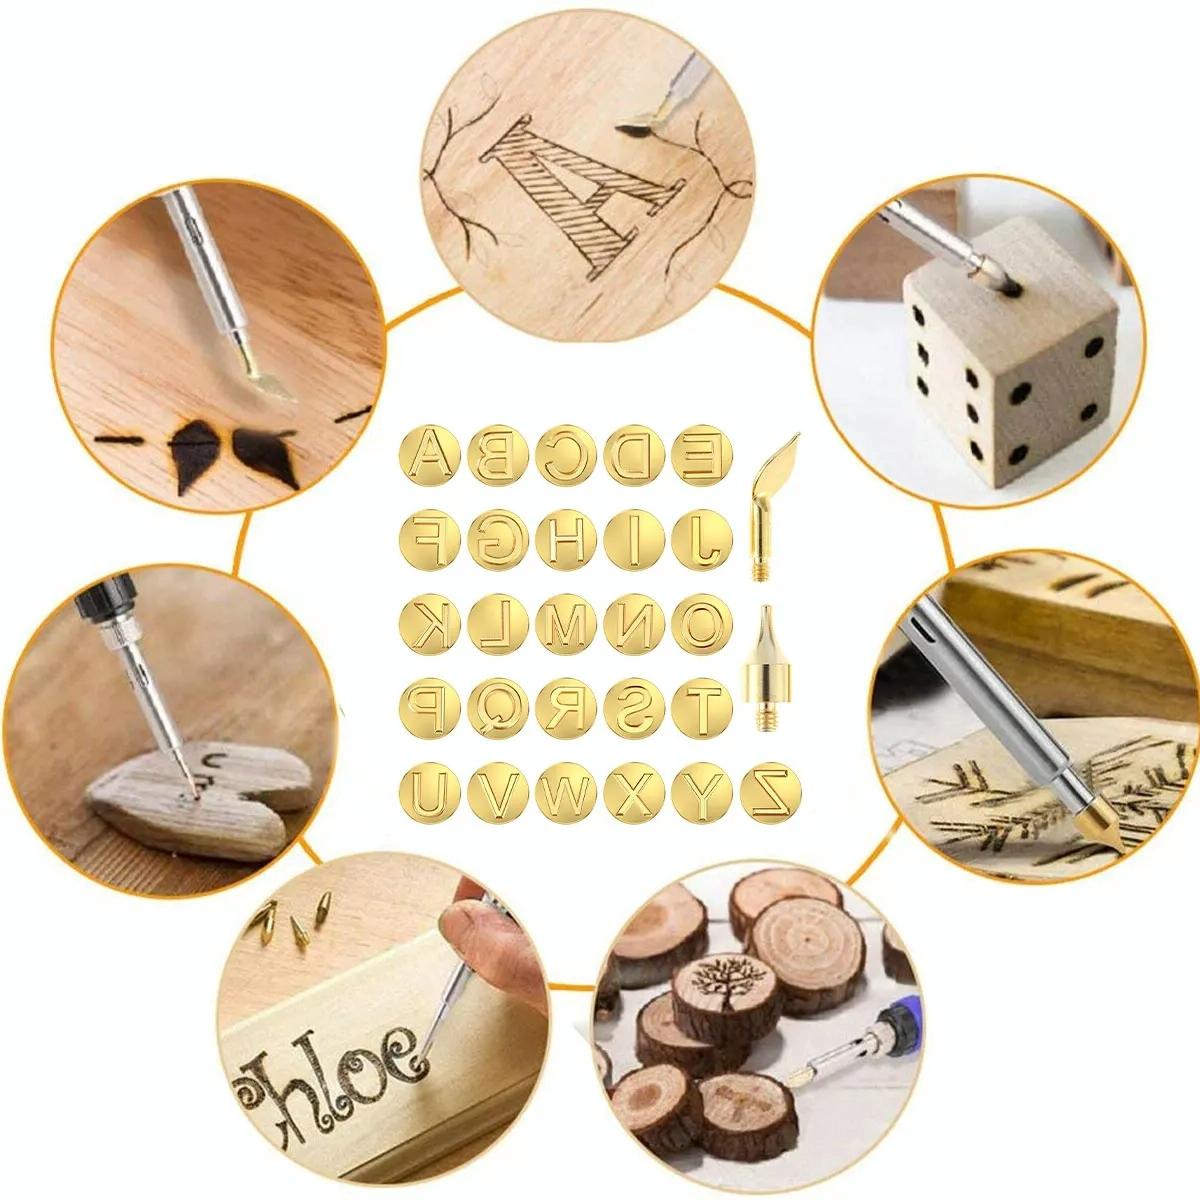 28 In 1 Wood Burning Solder Tips Uppercase Alphabet Chiseled Tips Blades Pyrography Tool